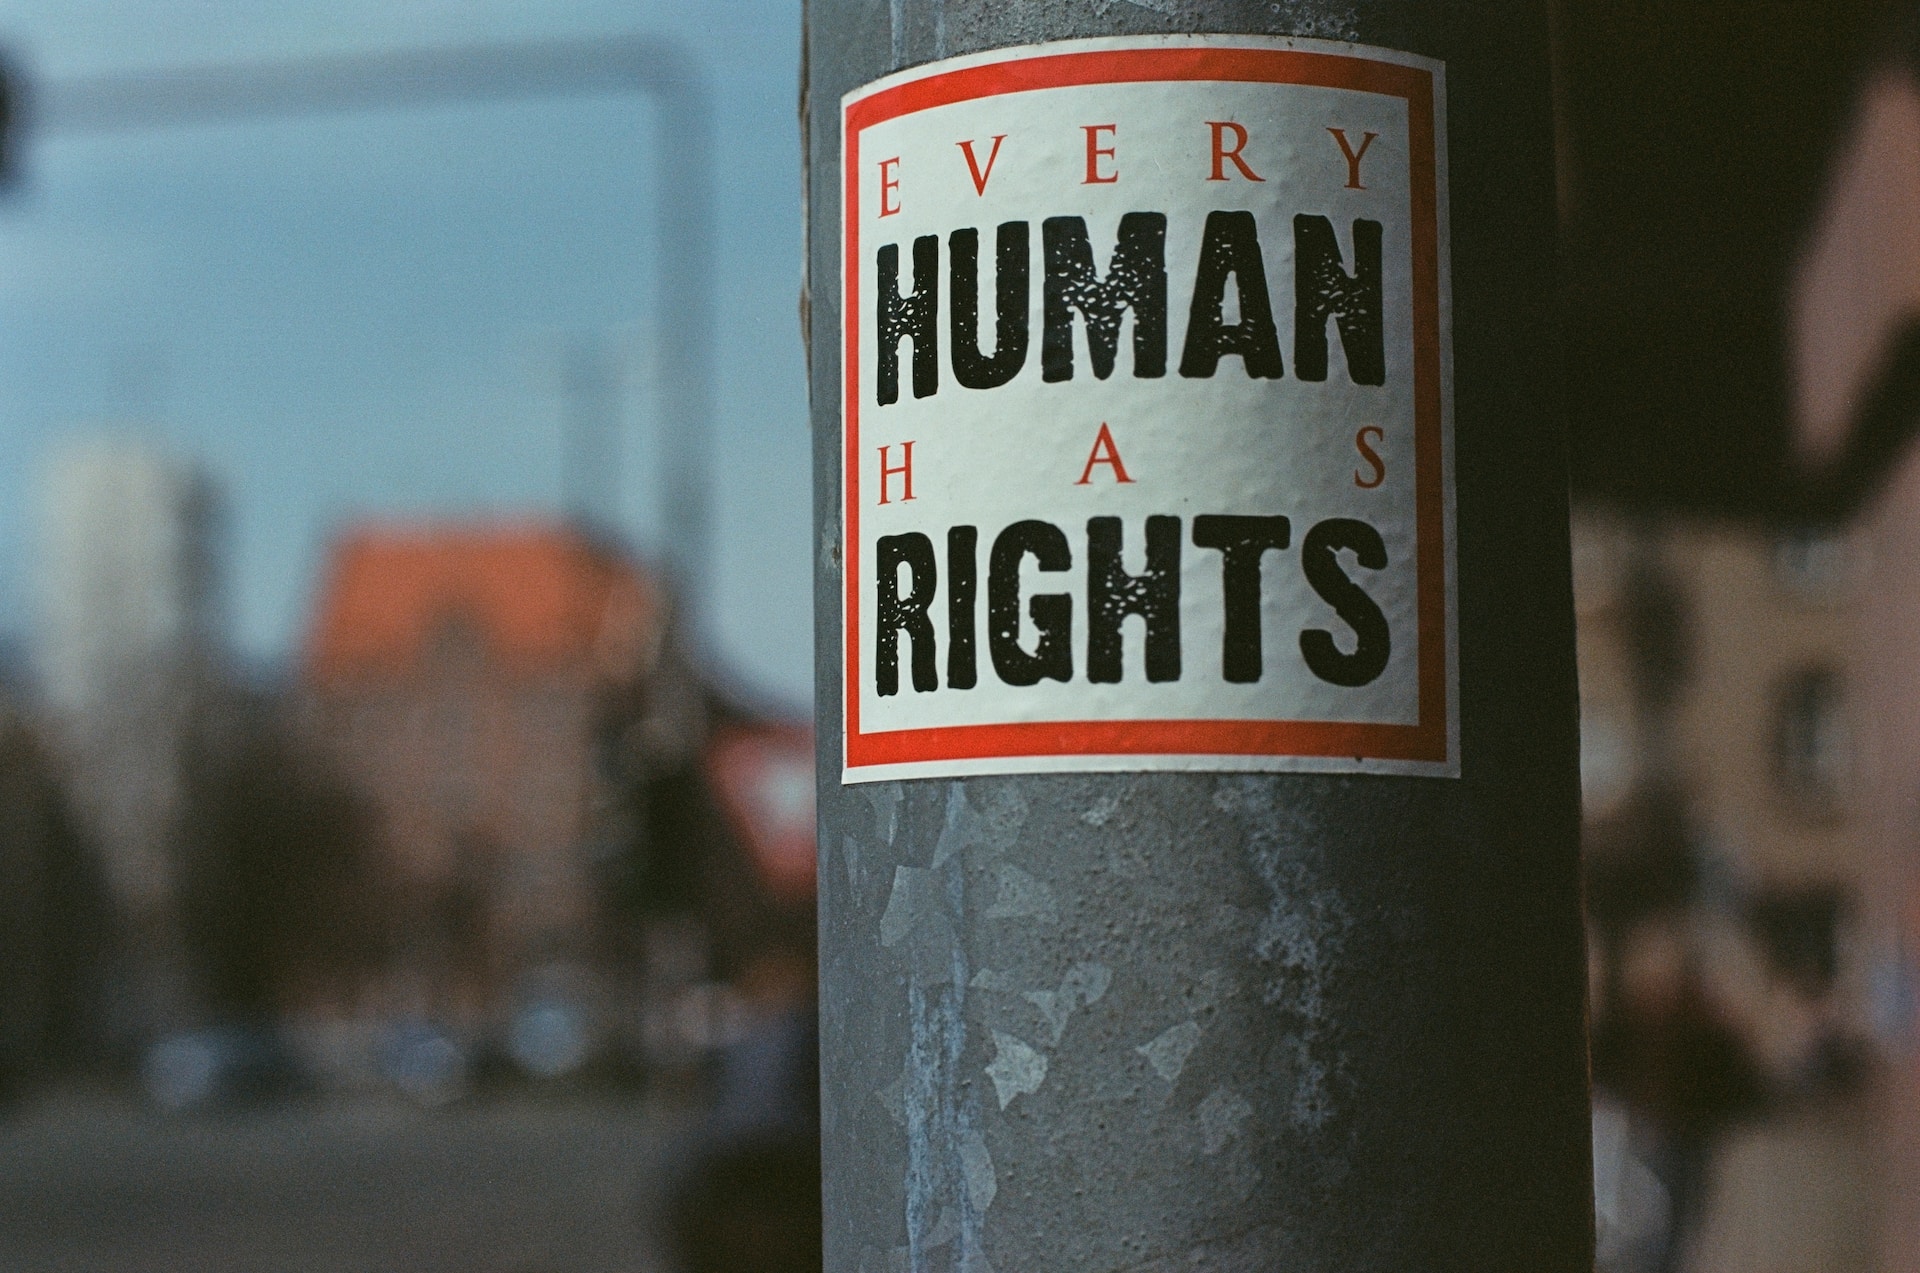 every human has rights